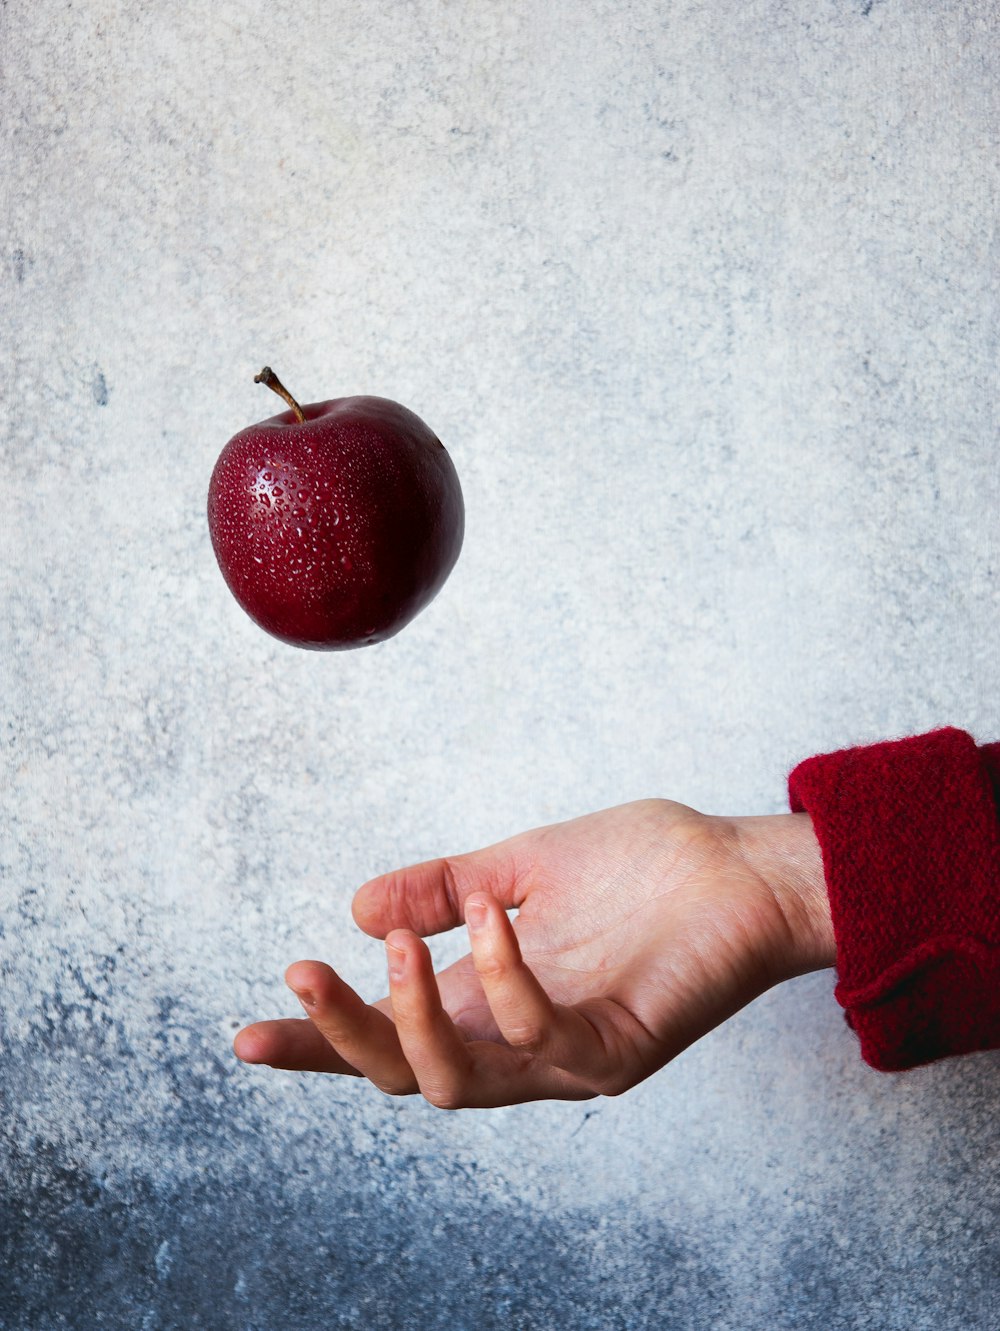 a hand reaching for an apple that is falling into the air